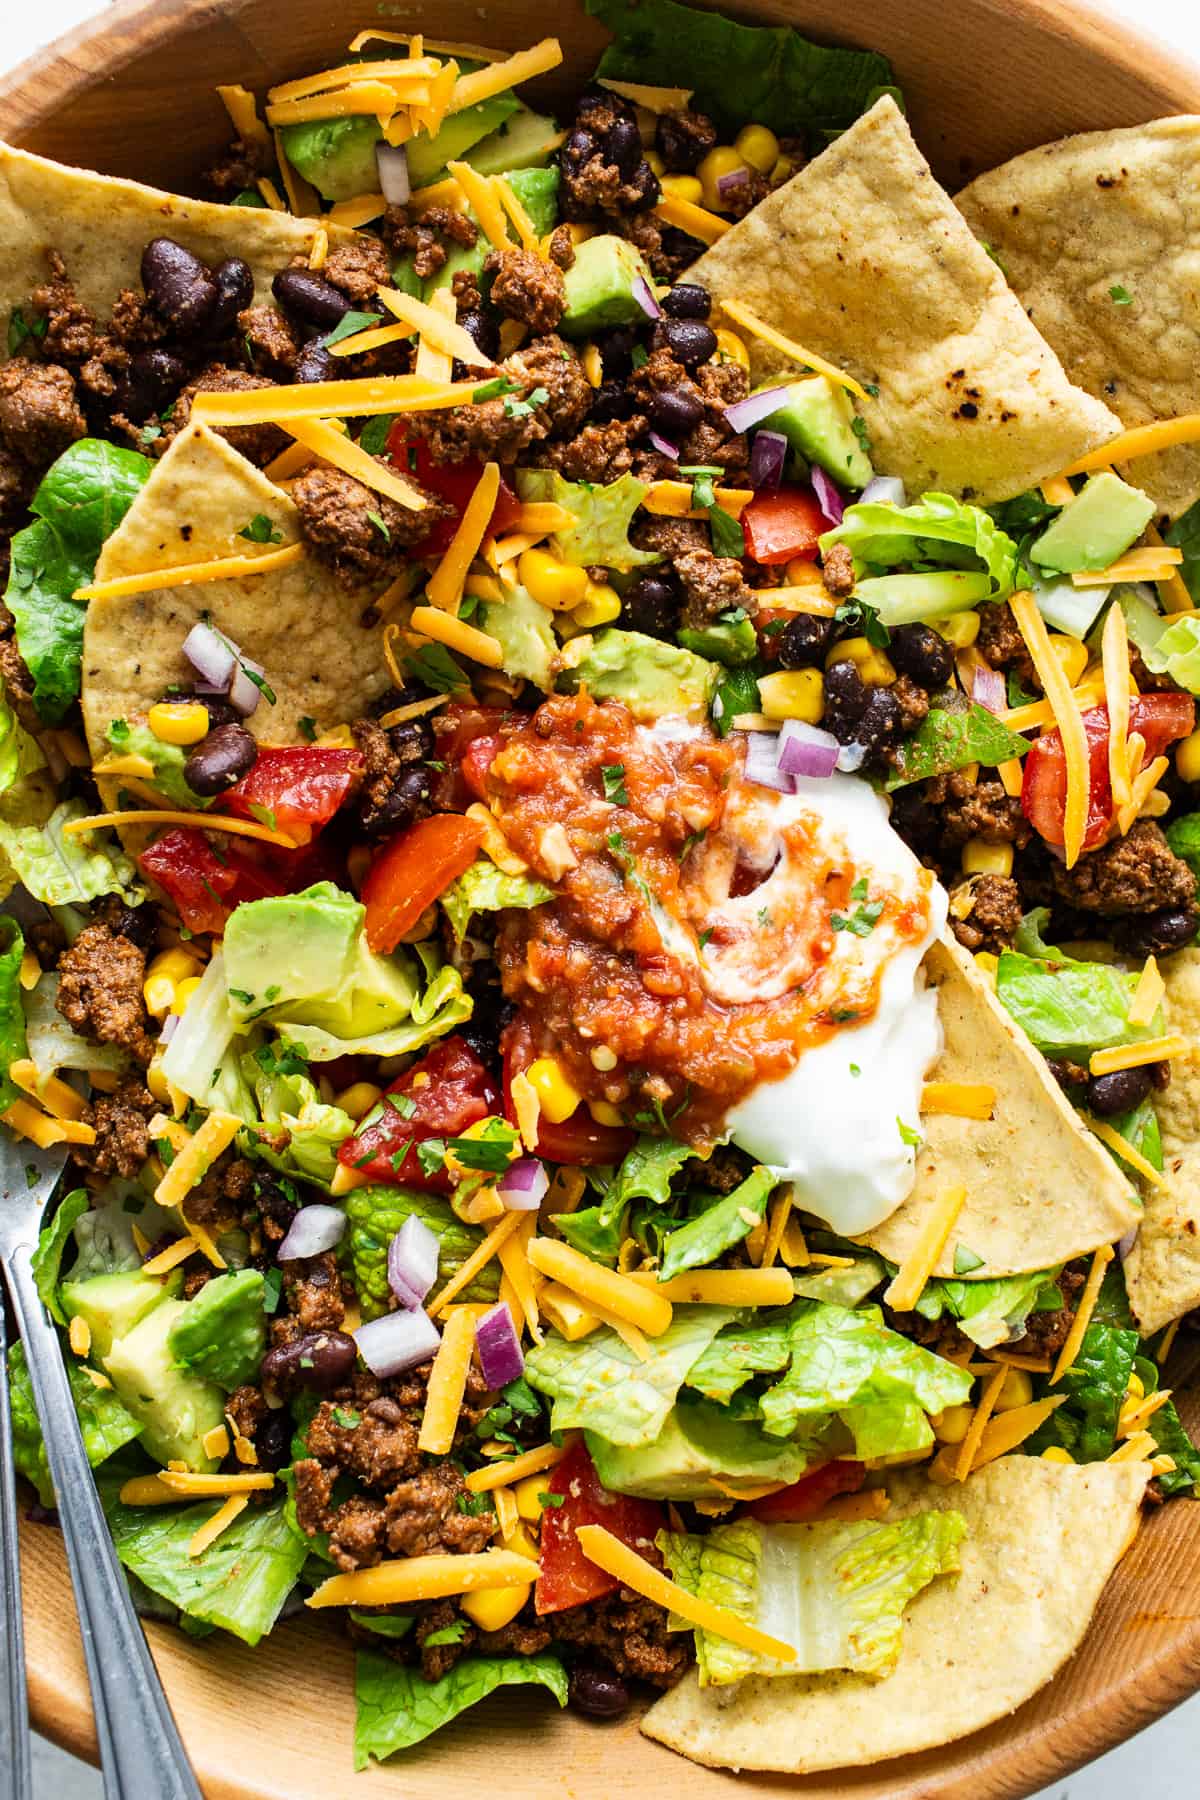 A taco salad bowl garnished with shredded cheddar cheese, sour cream, and chunky salsa.